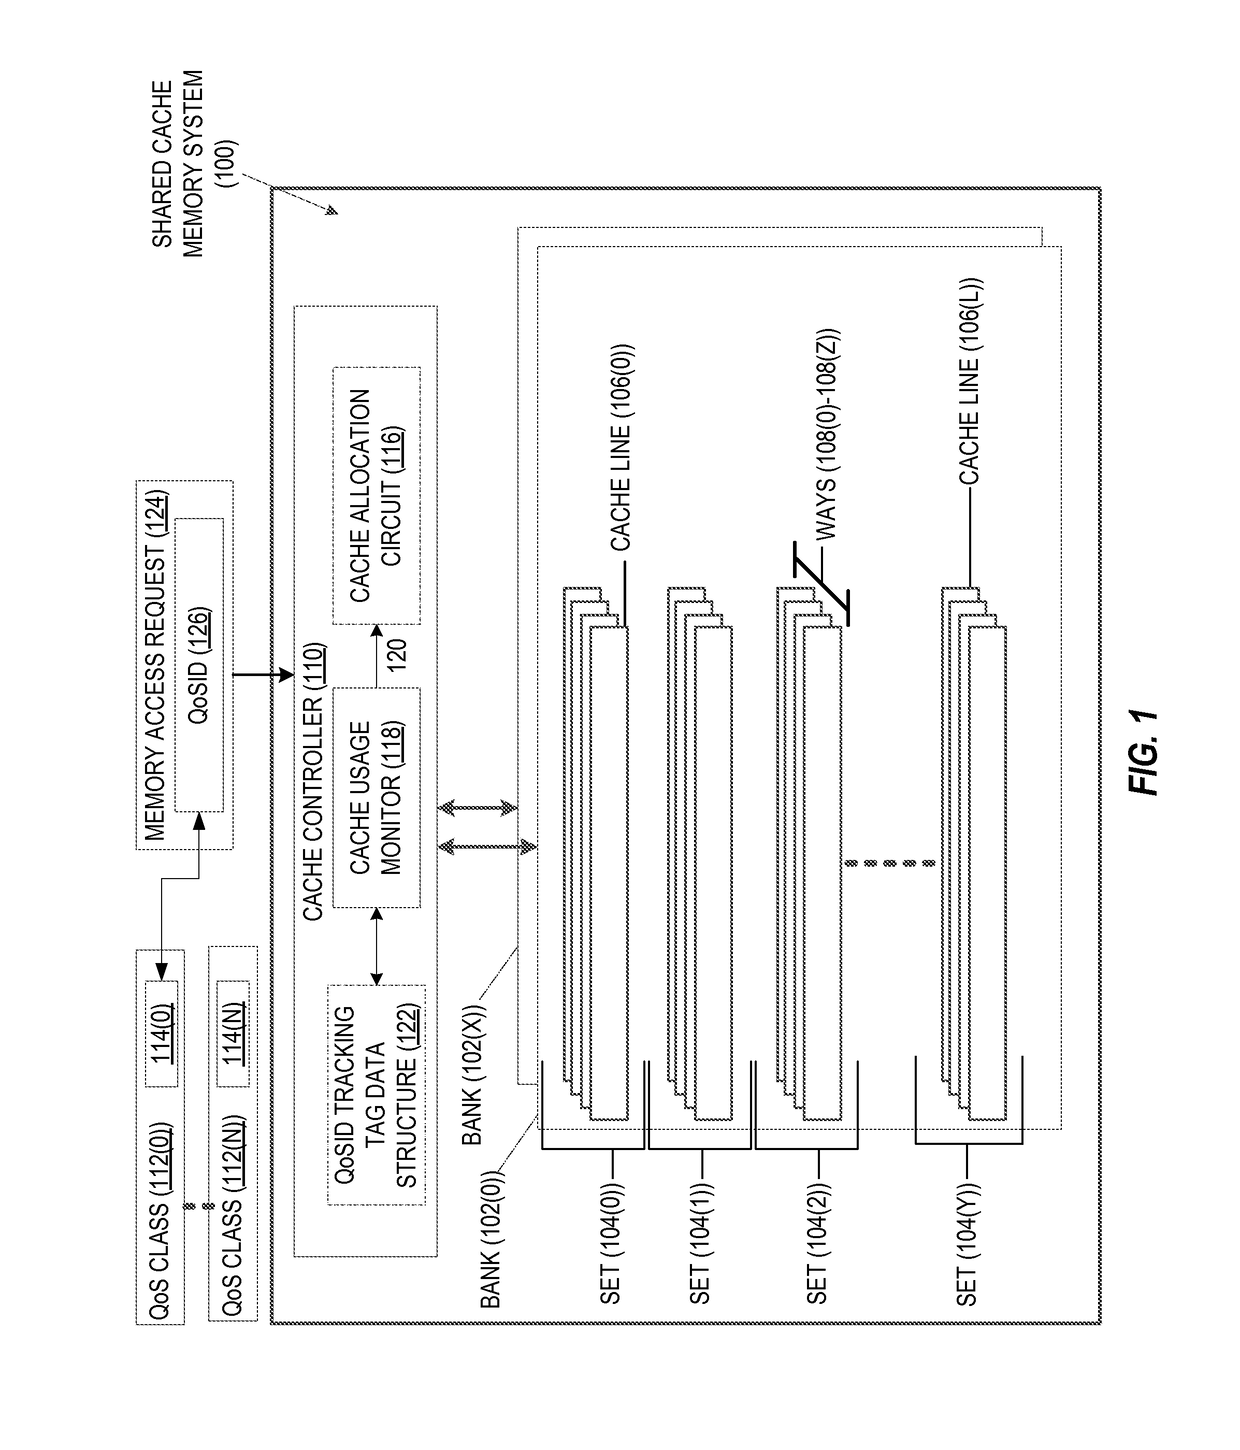 Generating approximate usage measurements for shared cache memory systems